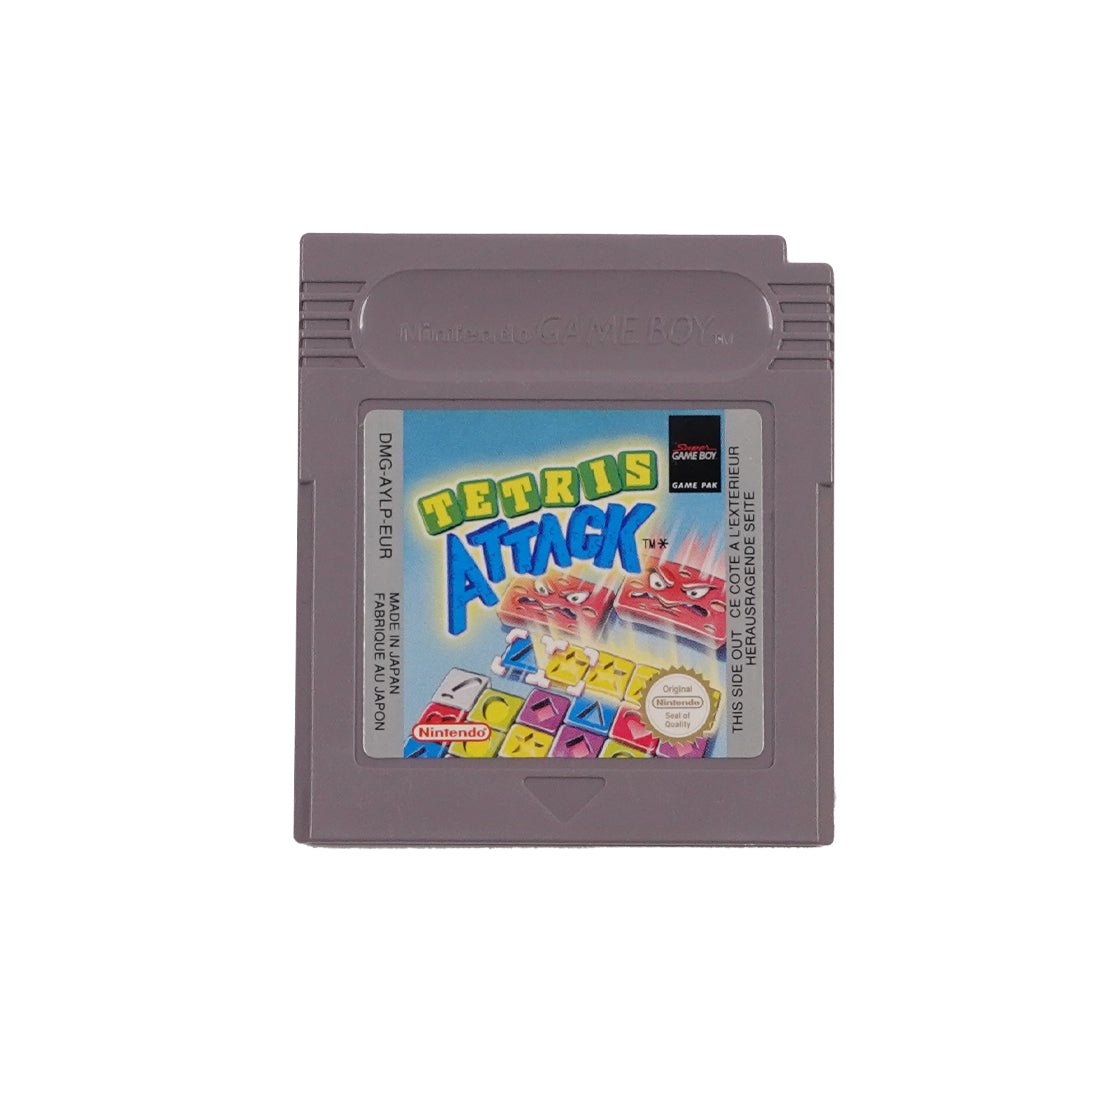 (Pre-Owned) Tetris Attack - Gameboy Classic - Store 974 | ستور ٩٧٤